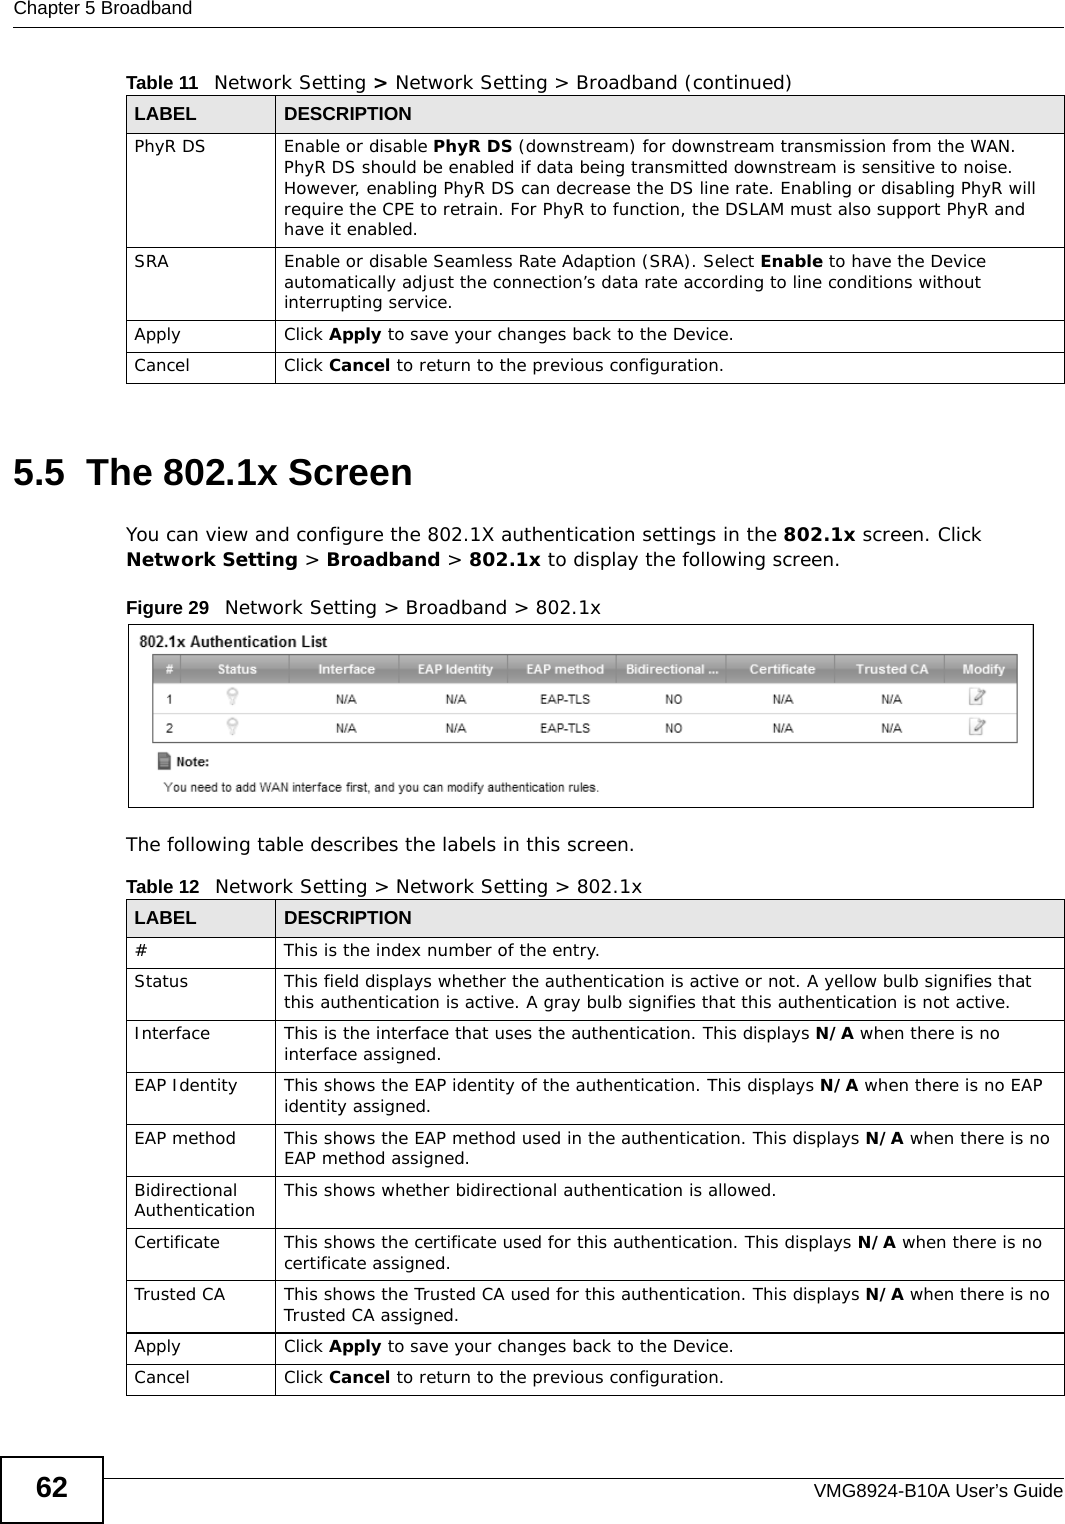 Chapter 5 BroadbandVMG8924-B10A User’s Guide625.5  The 802.1x ScreenYou can view and configure the 802.1X authentication settings in the 802.1x screen. Click Network Setting &gt; Broadband &gt; 802.1x to display the following screen.Figure 29   Network Setting &gt; Broadband &gt; 802.1xThe following table describes the labels in this screen. PhyR DS Enable or disable PhyR DS (downstream) for downstream transmission from the WAN. PhyR DS should be enabled if data being transmitted downstream is sensitive to noise. However, enabling PhyR DS can decrease the DS line rate. Enabling or disabling PhyR will require the CPE to retrain. For PhyR to function, the DSLAM must also support PhyR and have it enabled.SRA Enable or disable Seamless Rate Adaption (SRA). Select Enable to have the Device automatically adjust the connection’s data rate according to line conditions without interrupting service.Apply Click Apply to save your changes back to the Device.Cancel Click Cancel to return to the previous configuration.Table 11   Network Setting &gt; Network Setting &gt; Broadband (continued)LABEL DESCRIPTIONTable 12   Network Setting &gt; Network Setting &gt; 802.1xLABEL DESCRIPTION# This is the index number of the entry.Status  This field displays whether the authentication is active or not. A yellow bulb signifies that this authentication is active. A gray bulb signifies that this authentication is not active.Interface This is the interface that uses the authentication. This displays N/A when there is no interface assigned.EAP Identity This shows the EAP identity of the authentication. This displays N/A when there is no EAP identity assigned.EAP method This shows the EAP method used in the authentication. This displays N/A when there is no EAP method assigned.Bidirectional Authentication This shows whether bidirectional authentication is allowed. Certificate This shows the certificate used for this authentication. This displays N/A when there is no certificate assigned.Trusted CA This shows the Trusted CA used for this authentication. This displays N/A when there is no Trusted CA assigned.Apply Click Apply to save your changes back to the Device.Cancel Click Cancel to return to the previous configuration.